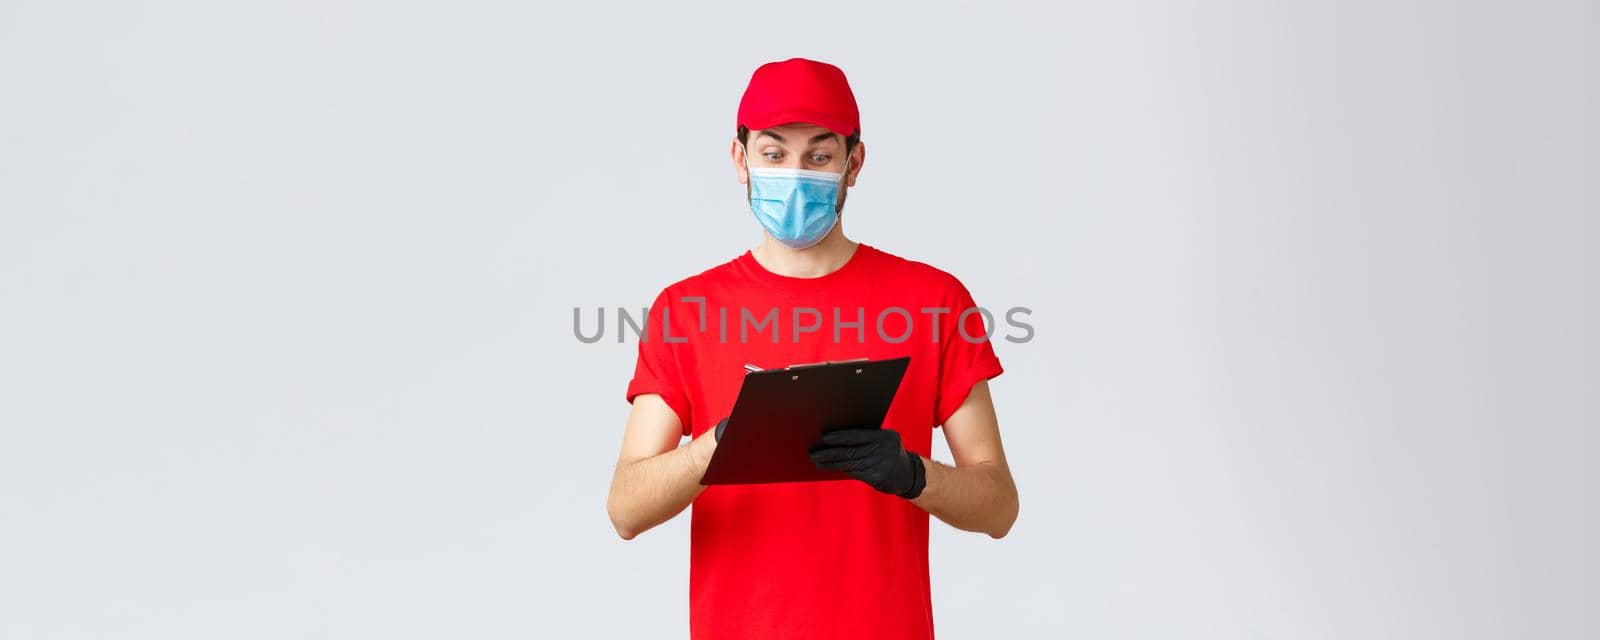 Packages and parcels delivery, covid-19 quarantine delivery, transfer orders. Enthusiastic courier in red uniform, face mask and gloves, writing down, checking order form on clipboard, deliver goods by Benzoix